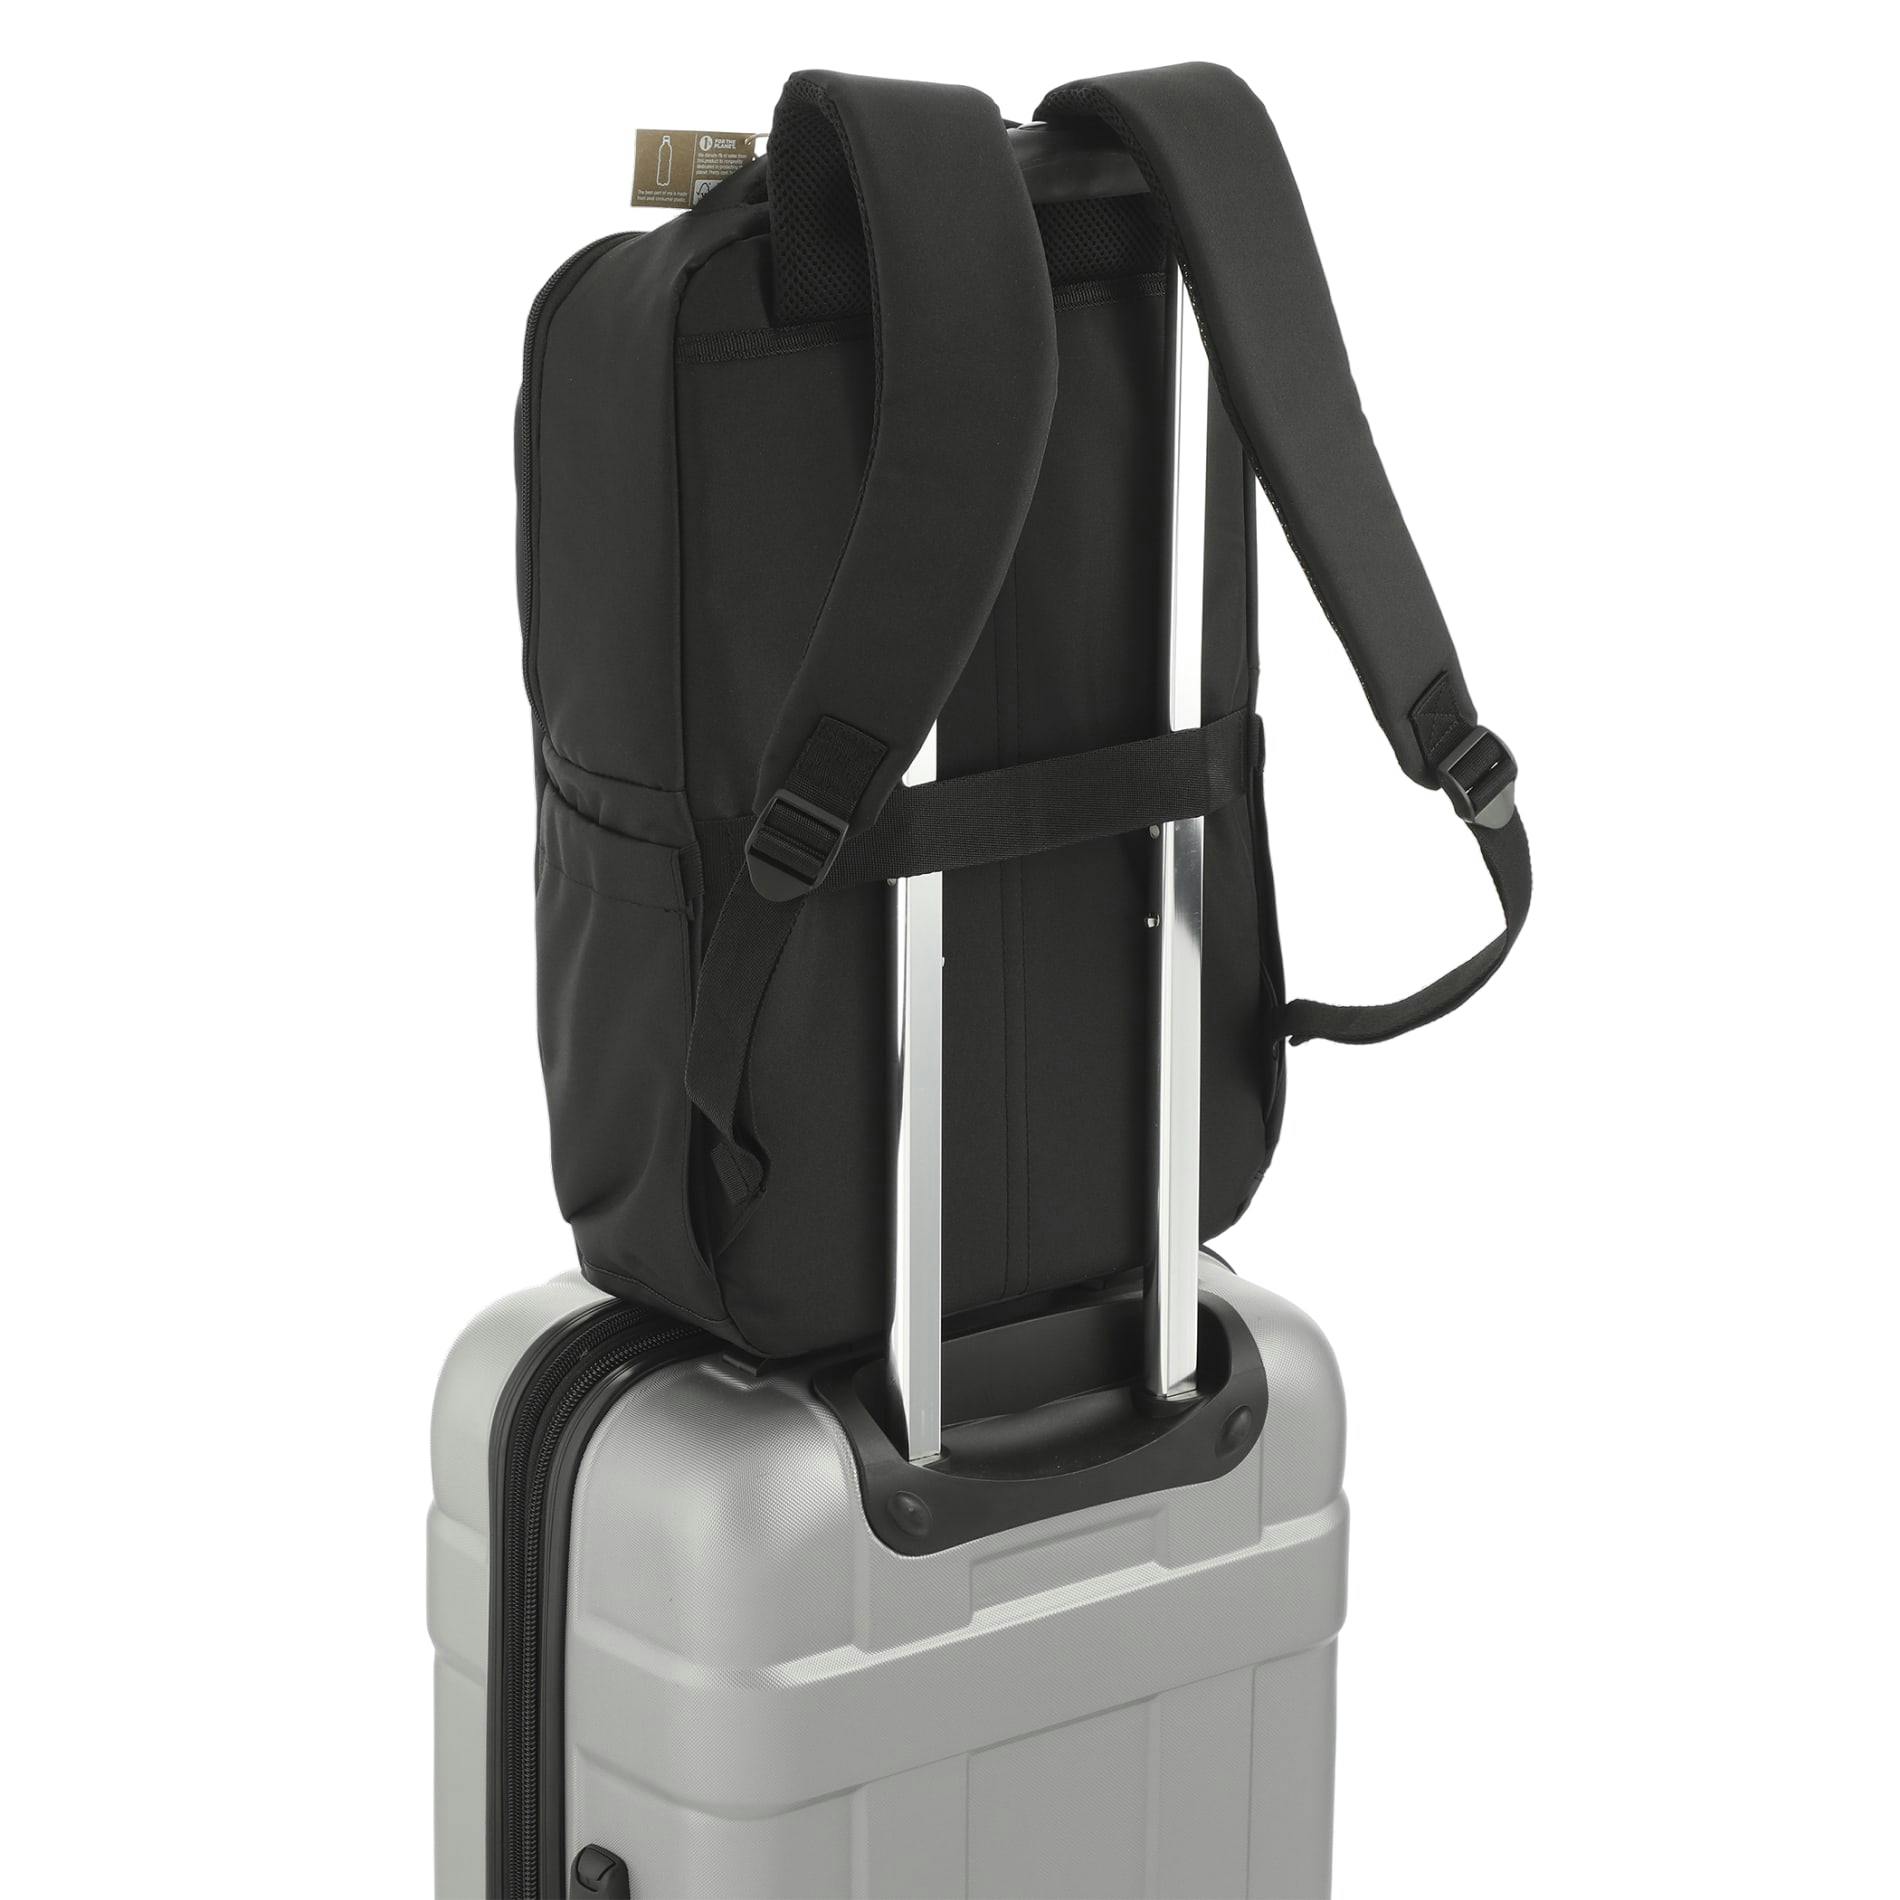 Tranzip Recycled 17" Computer Backpack - additional Image 4